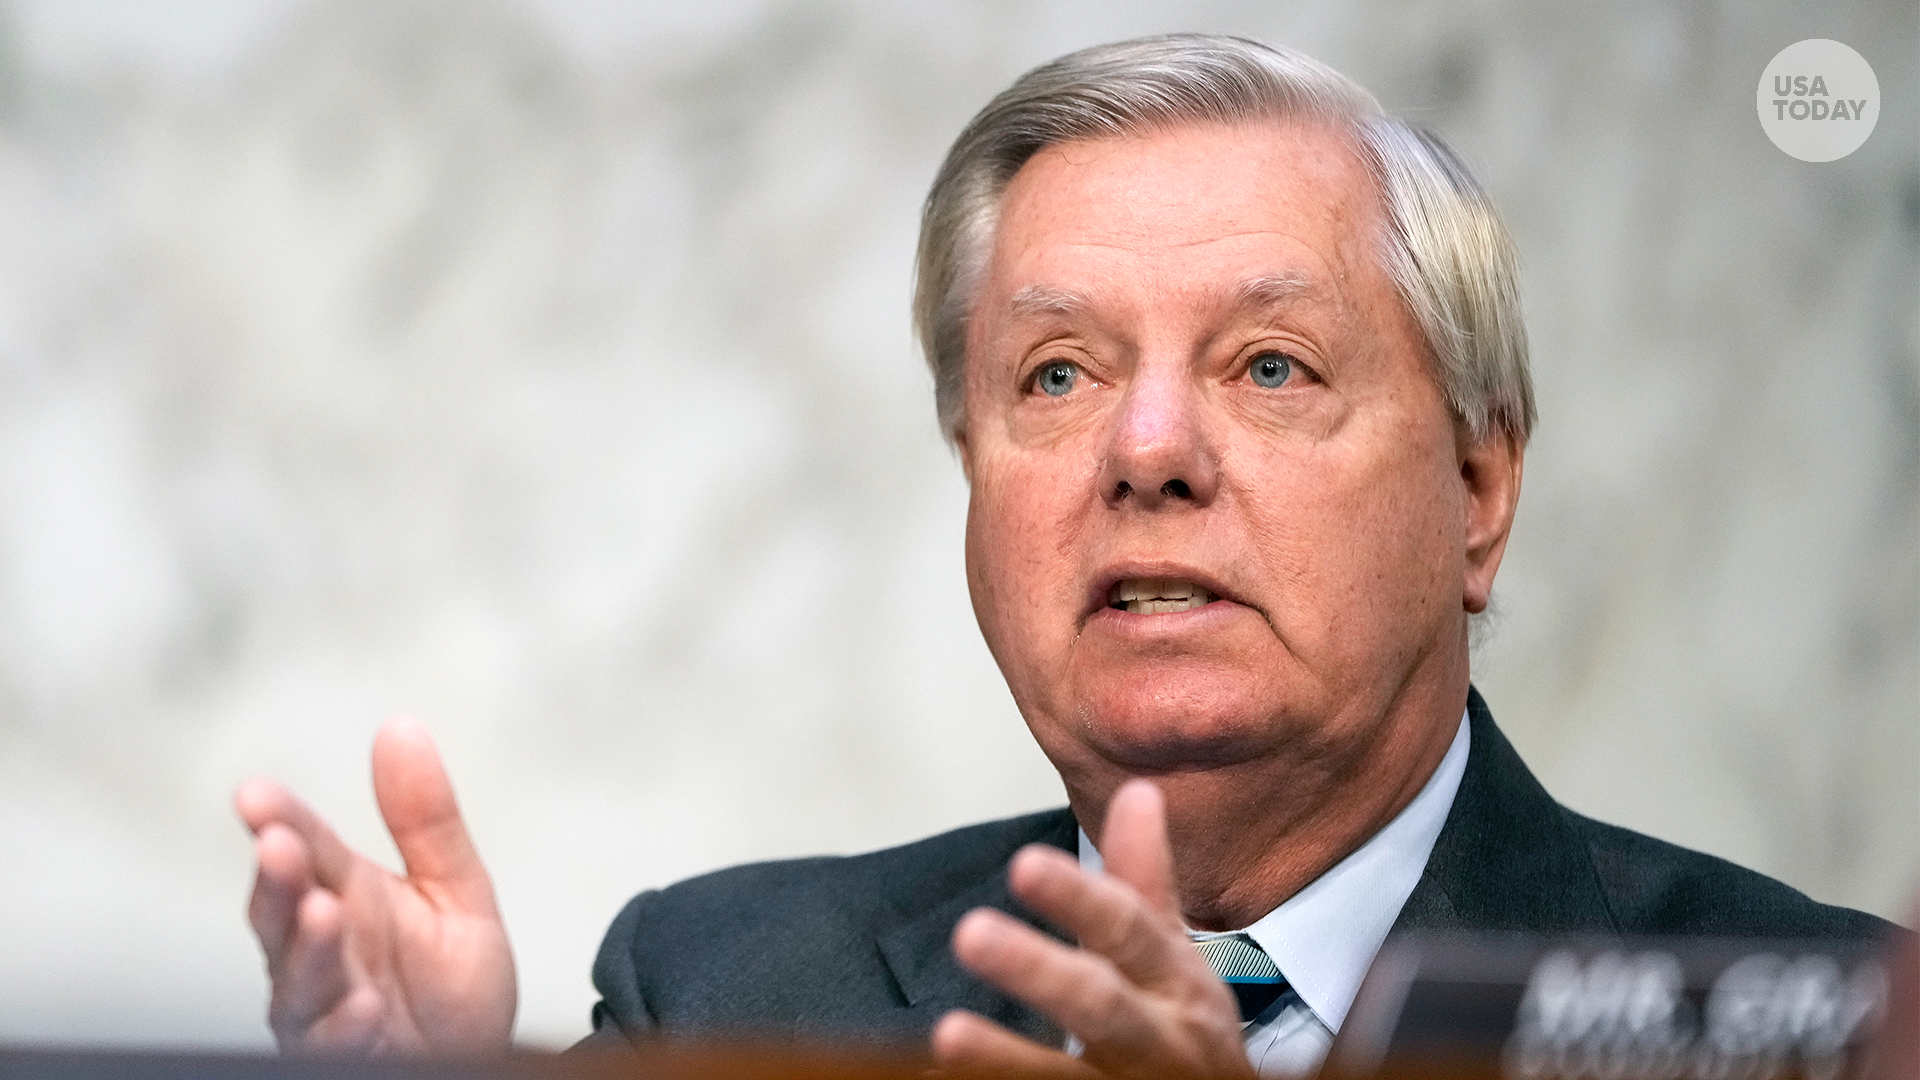 Nothing 'sinister': Sen. Lindsey Graham vouches for Biden amid classified docs discovery